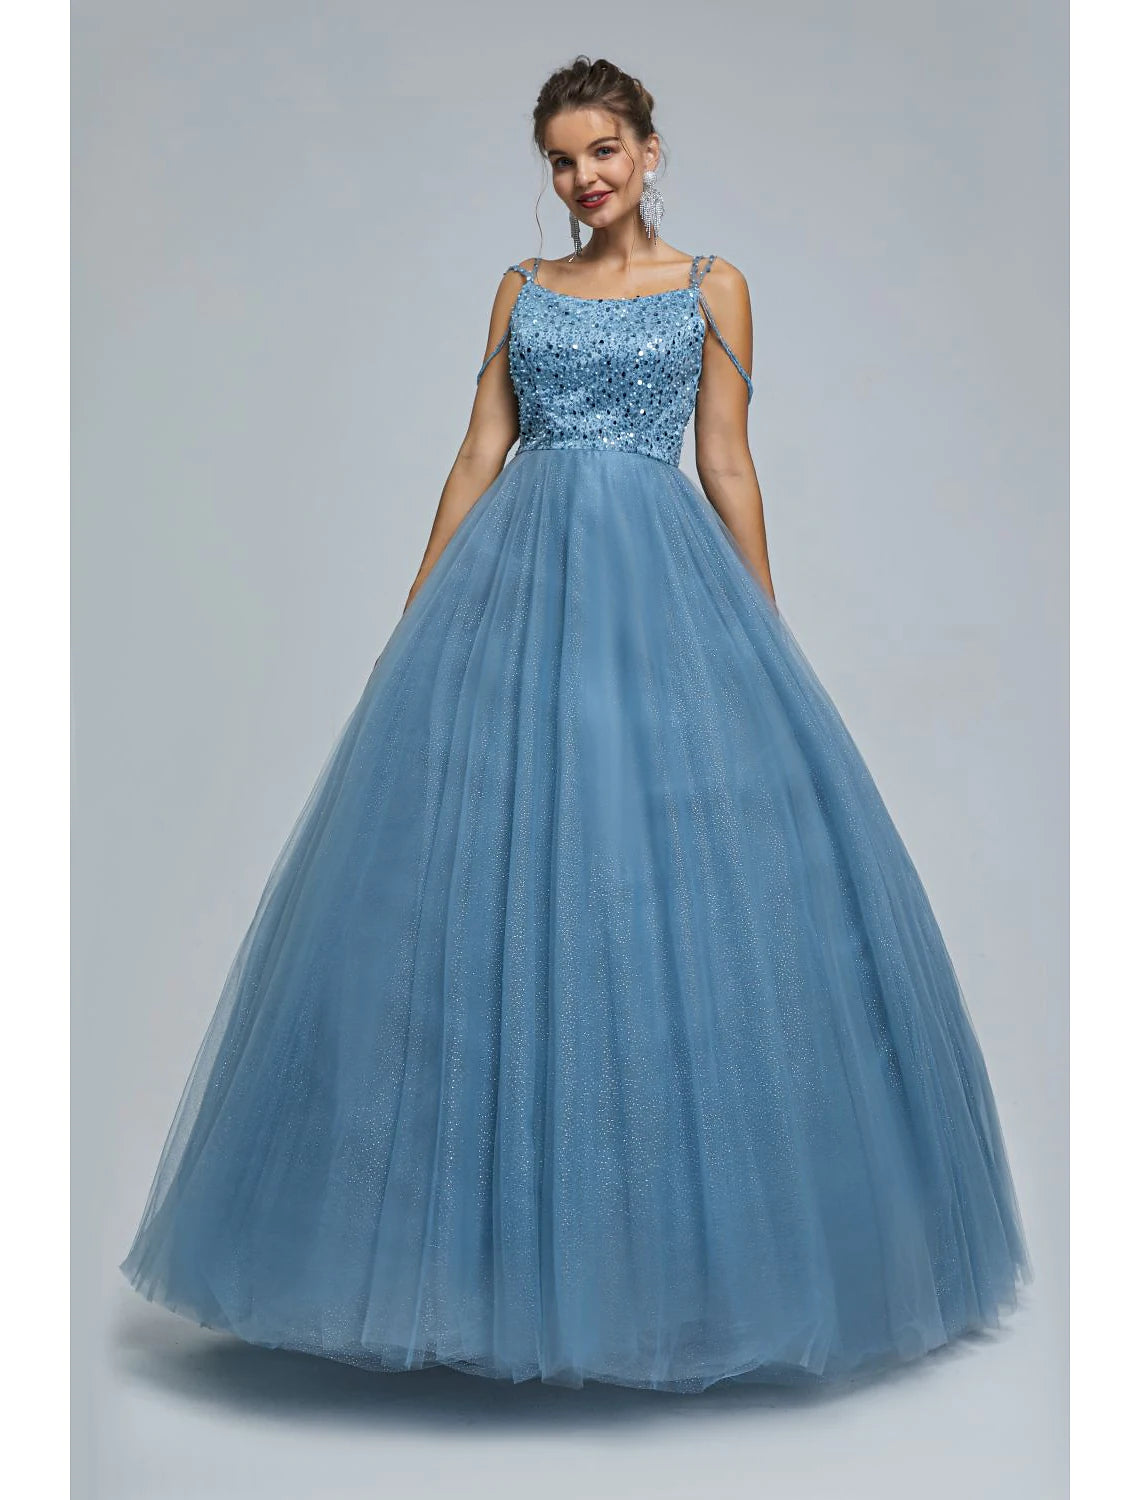 Ball Gown Prom Dresses Sparkle & Shine Dress Graduation Floor Length Sleeveless Spaghetti Strap Tulle with Pearls Sequin